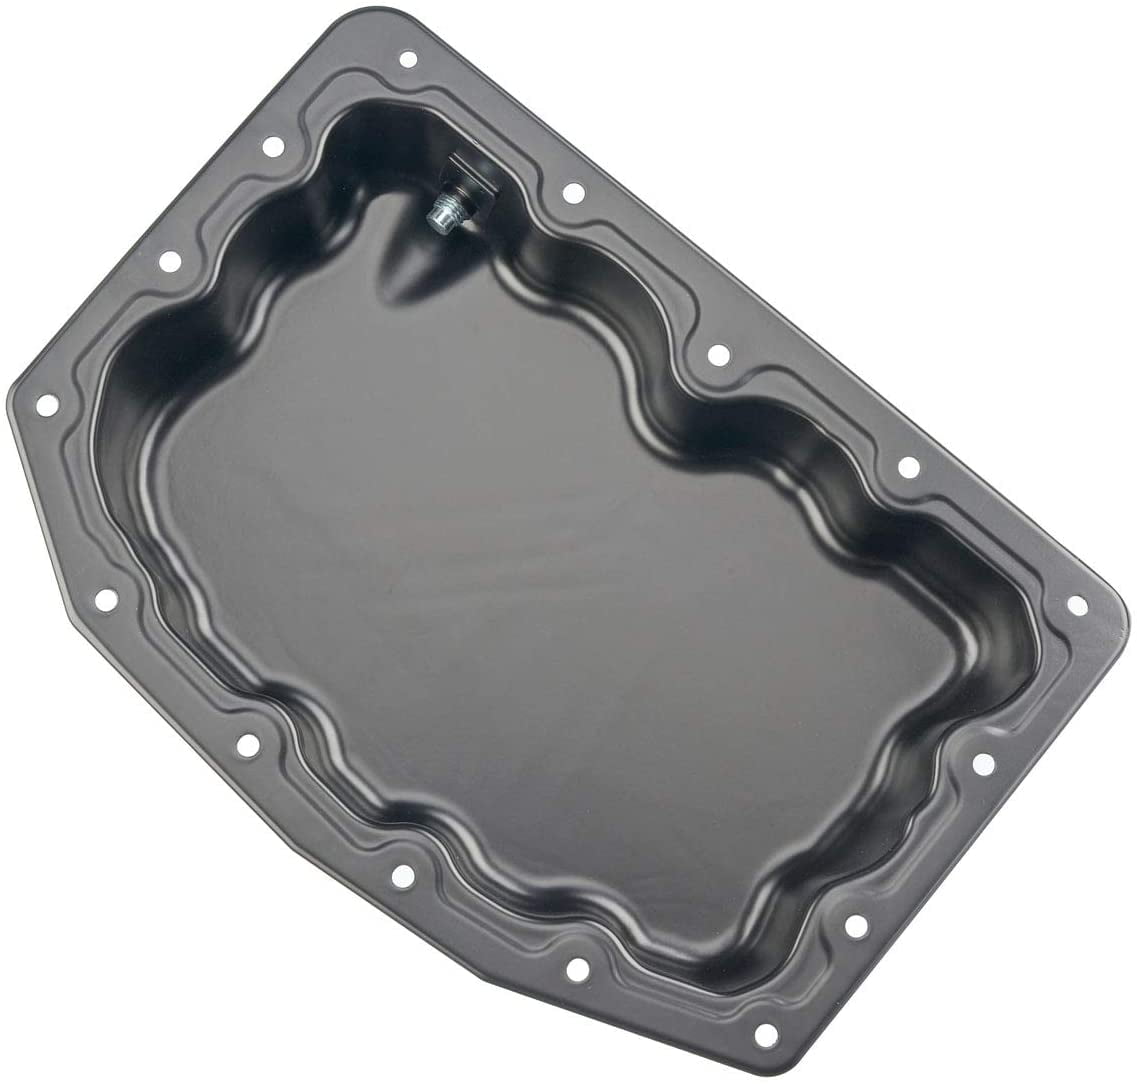 A-Premium Lower Engine Oil Pan with Drain Plug Compatible with Ford F-250/350/450/550 Super Duty 2011-2018 V8 6.7L